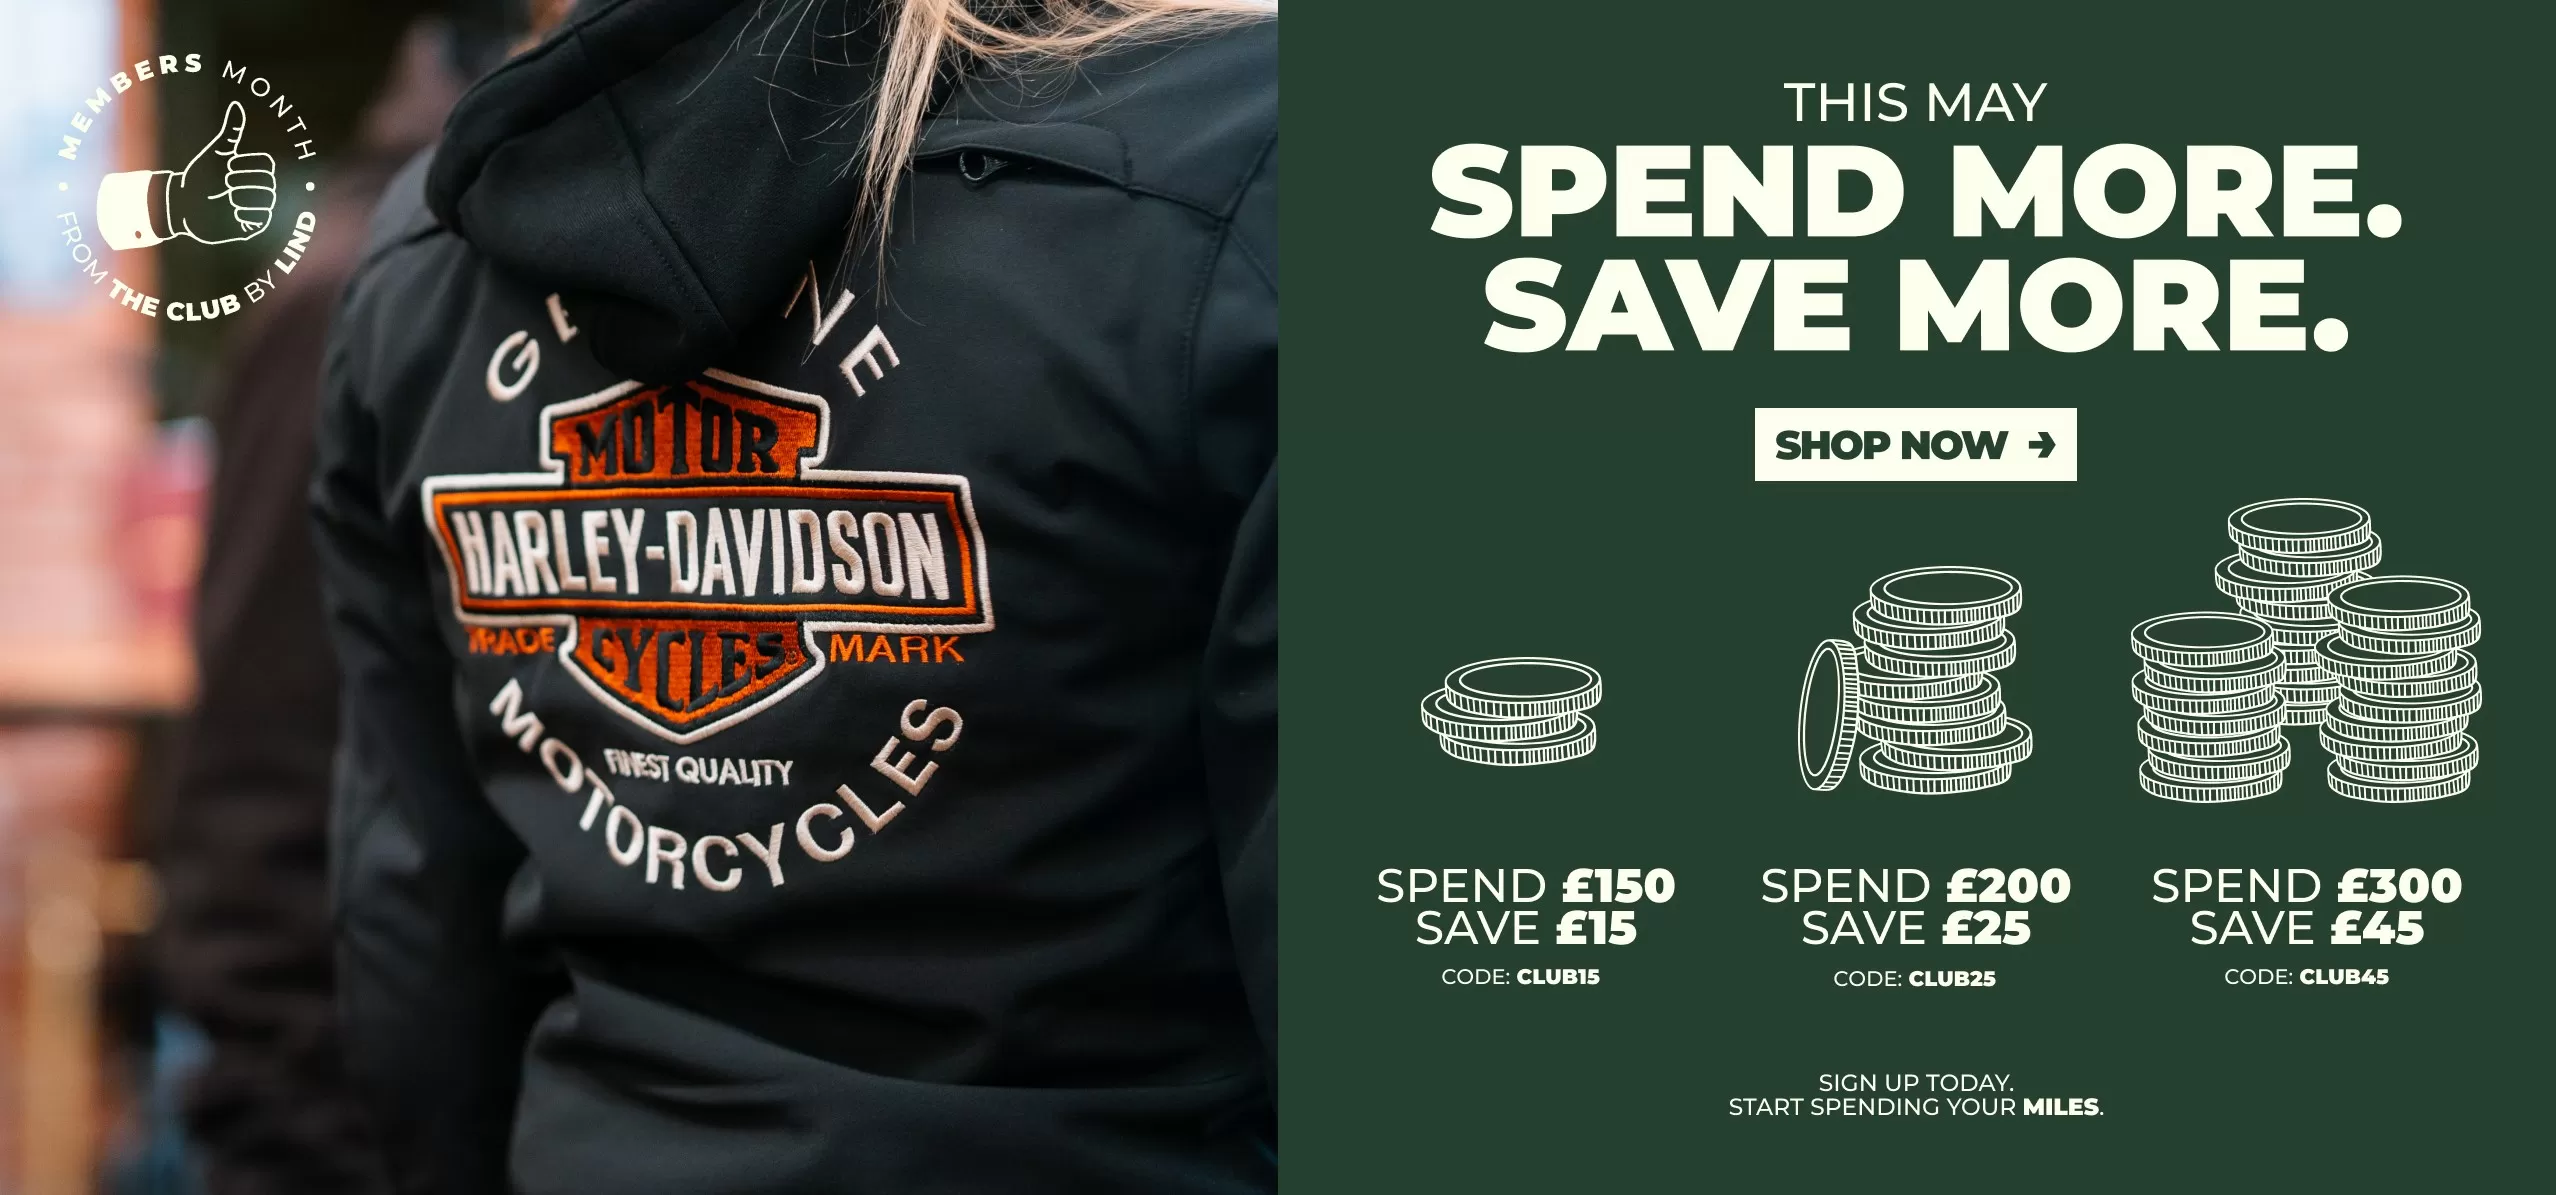 Harley-Davidson The Club Members Month Up To £45 off motorcycle lifestyle